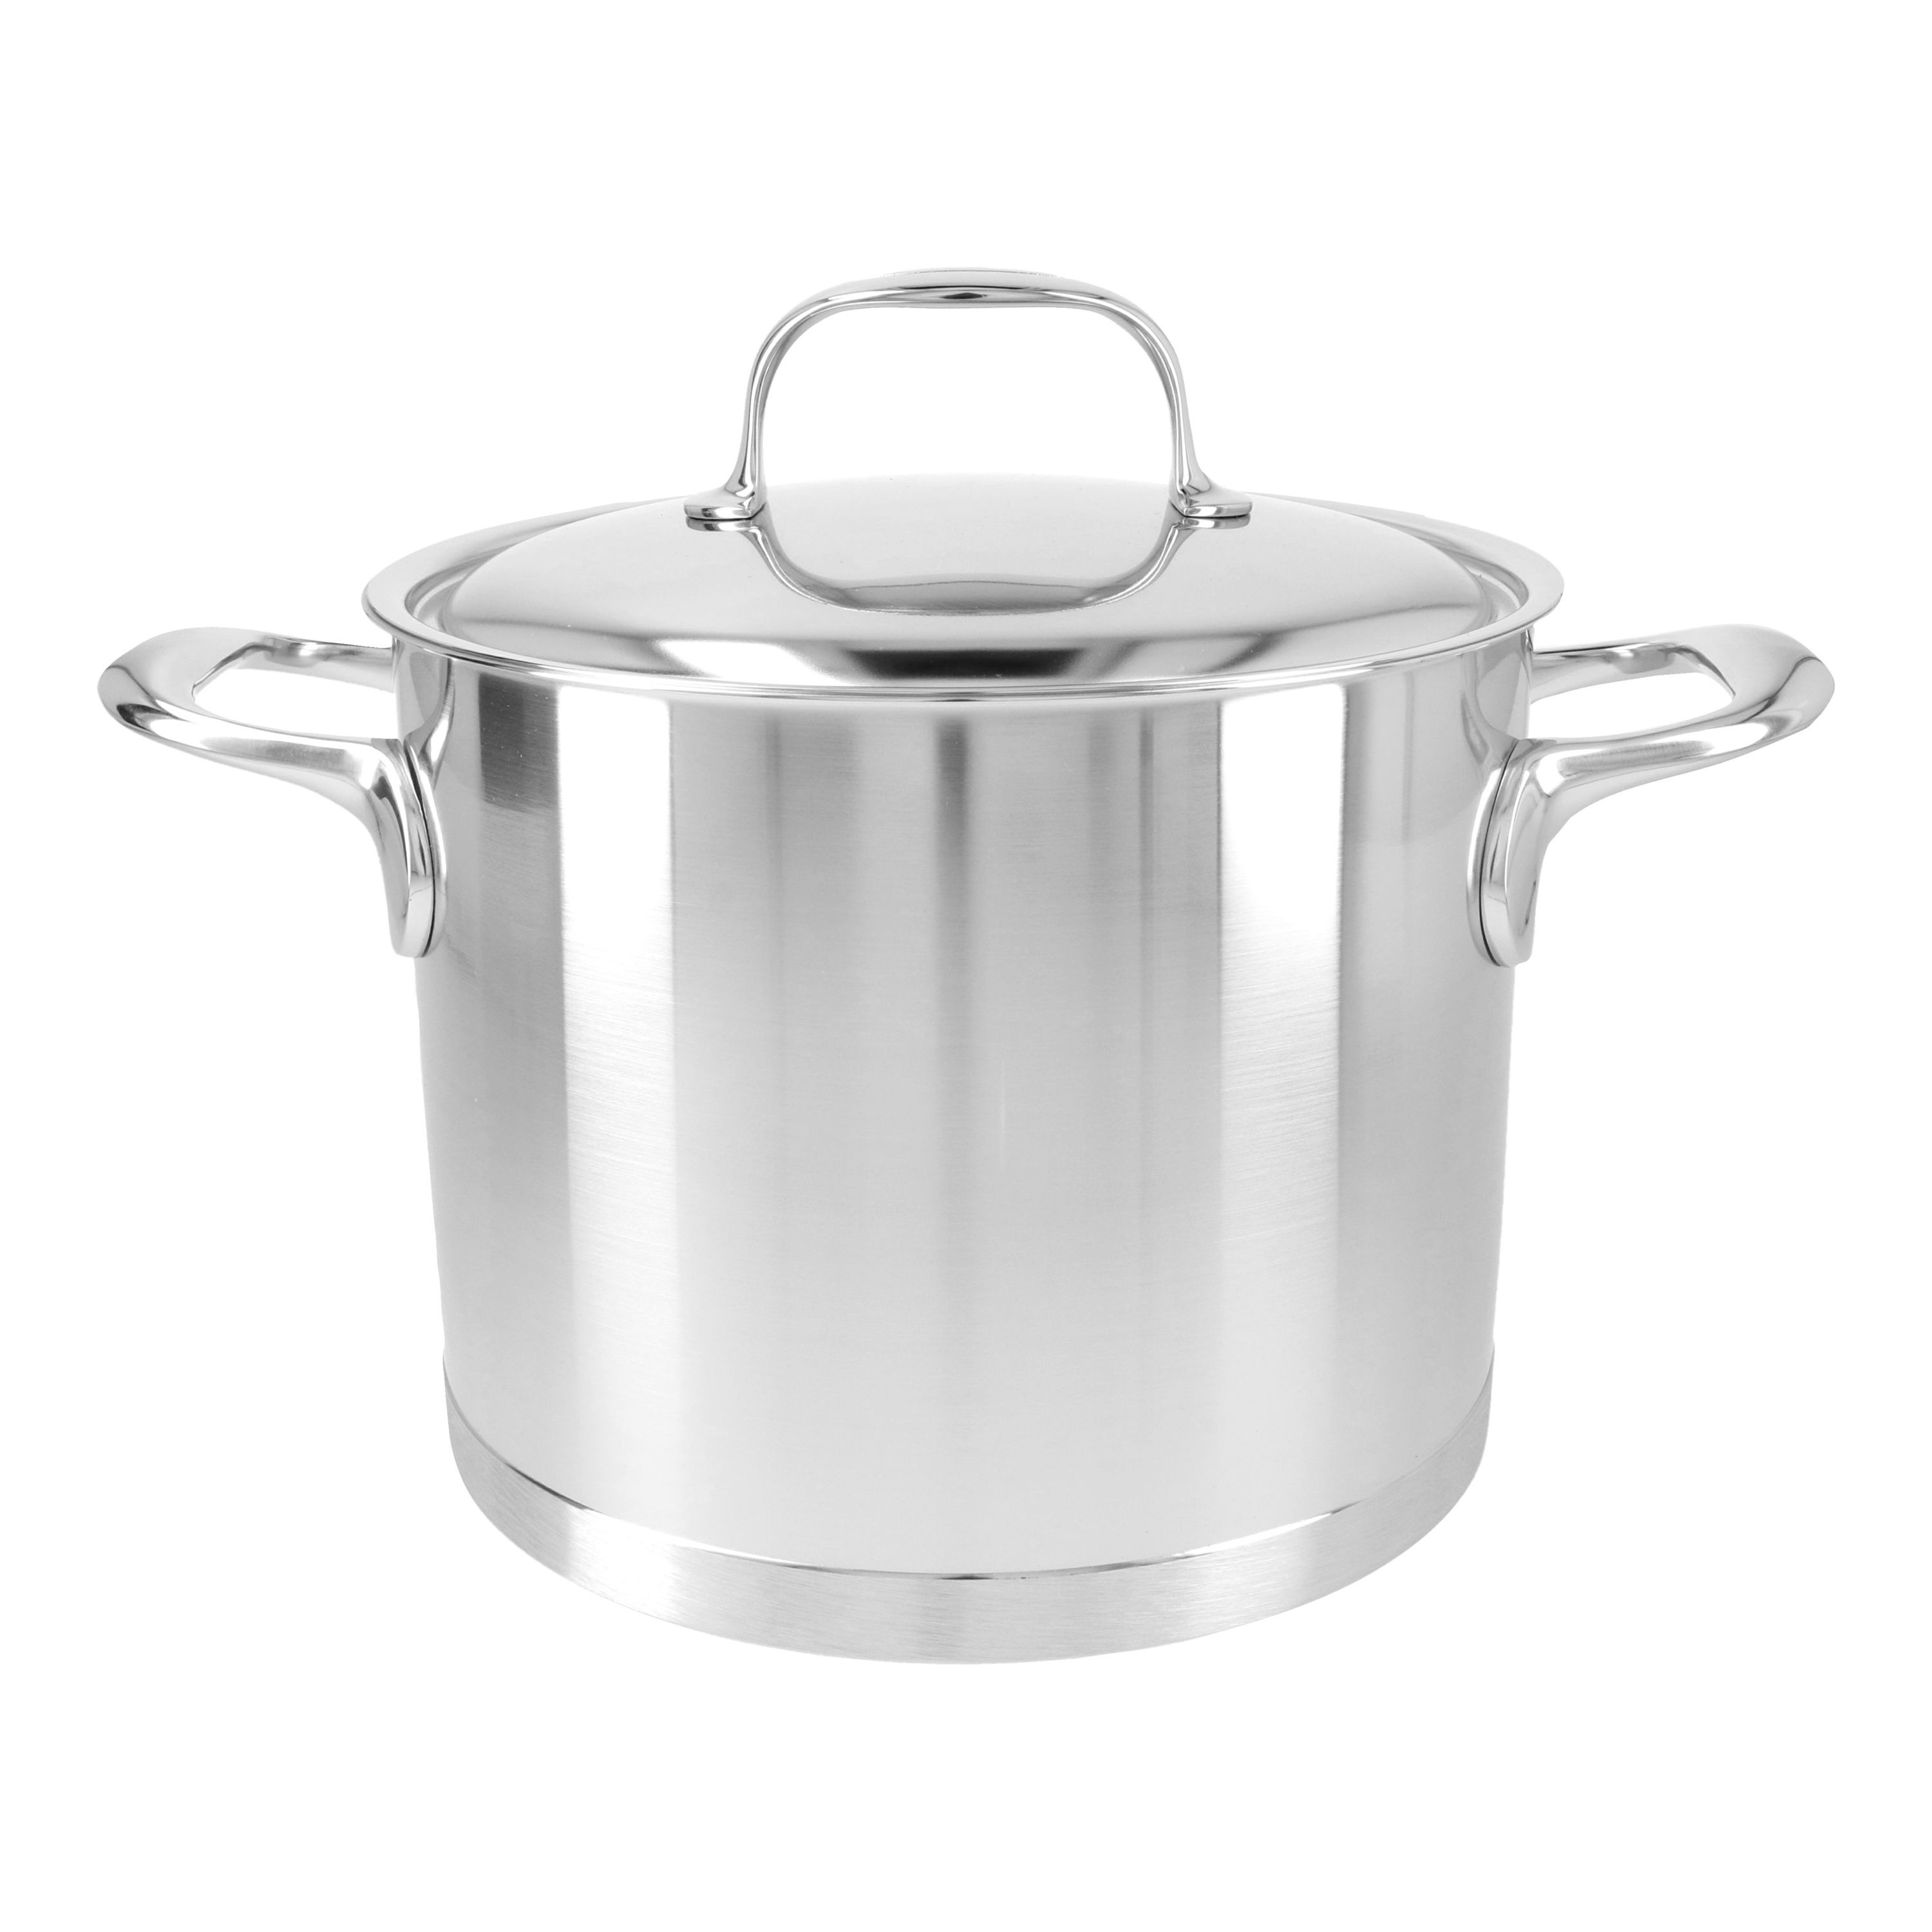 8.5 qt Stock pot with lid, 18/10 Stainless Steel